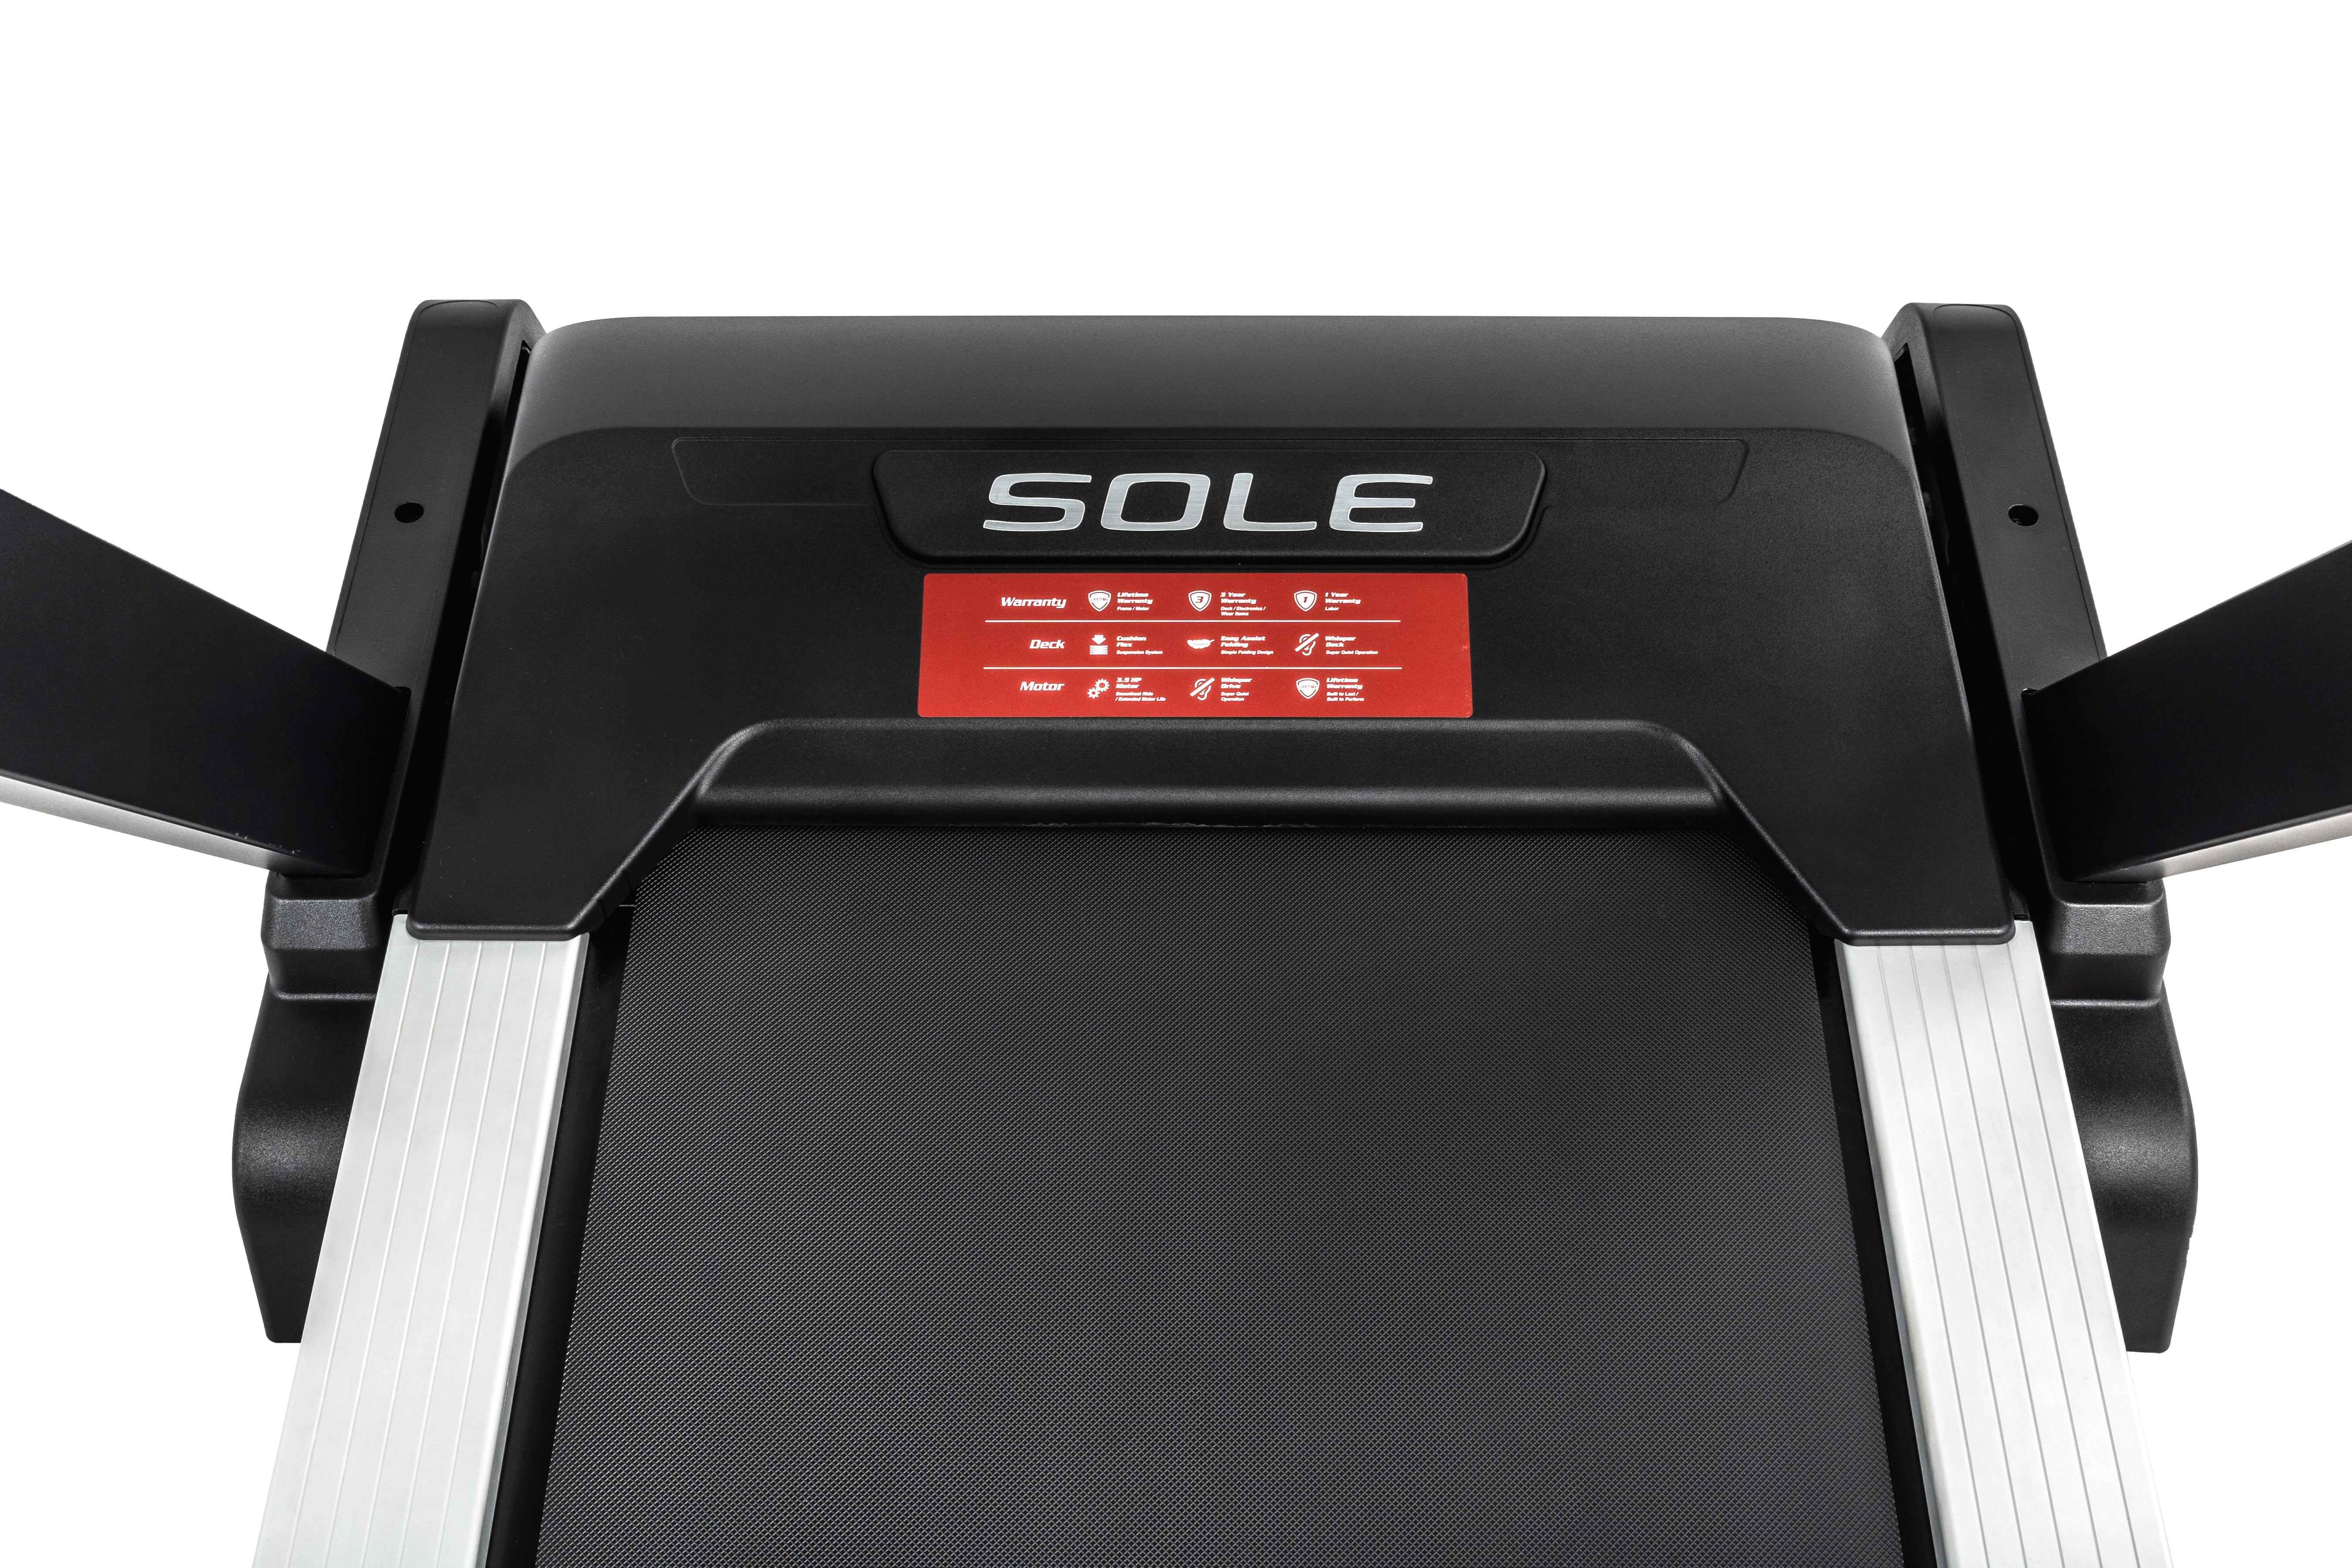 Overhead view of the Sole F80 treadmill showcasing the black running deck, side metallic rails, and a section of the control panel with the Sole logo and red warning labels.